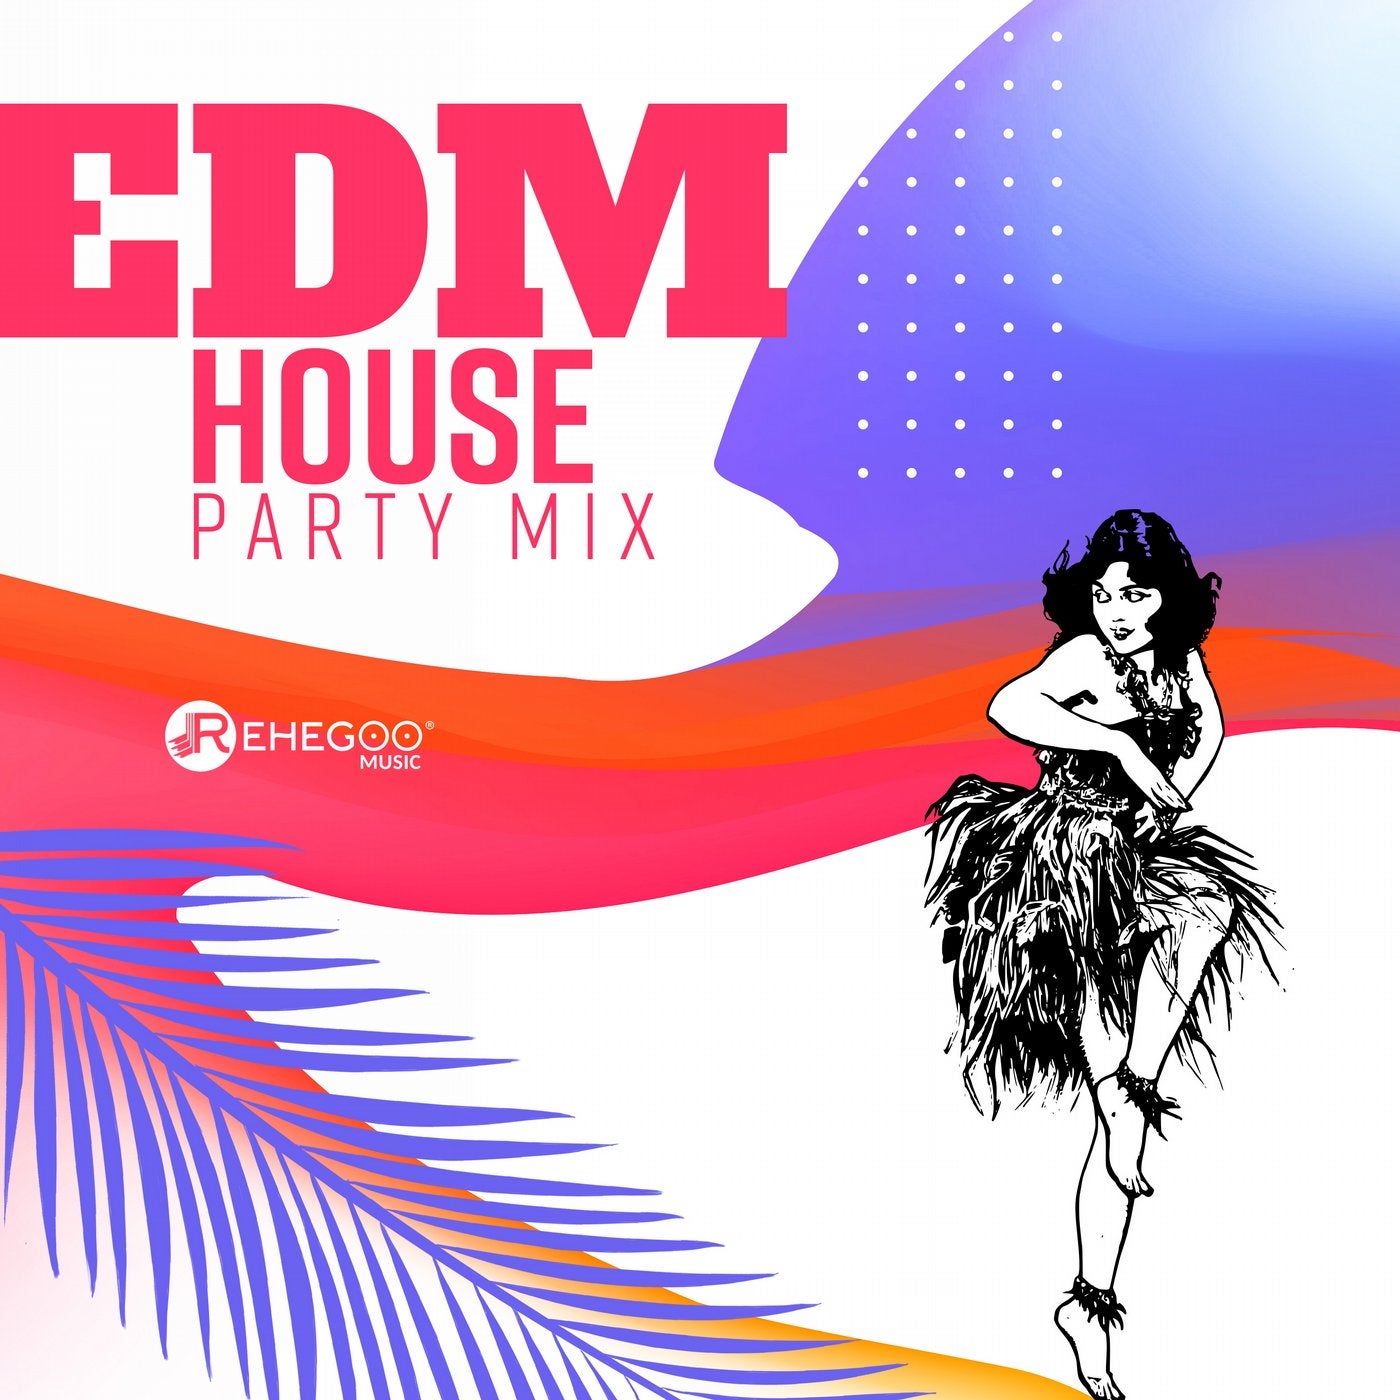 EDM House Party Mix ? Dance Music, Bigroom Night, New Electro Sounds